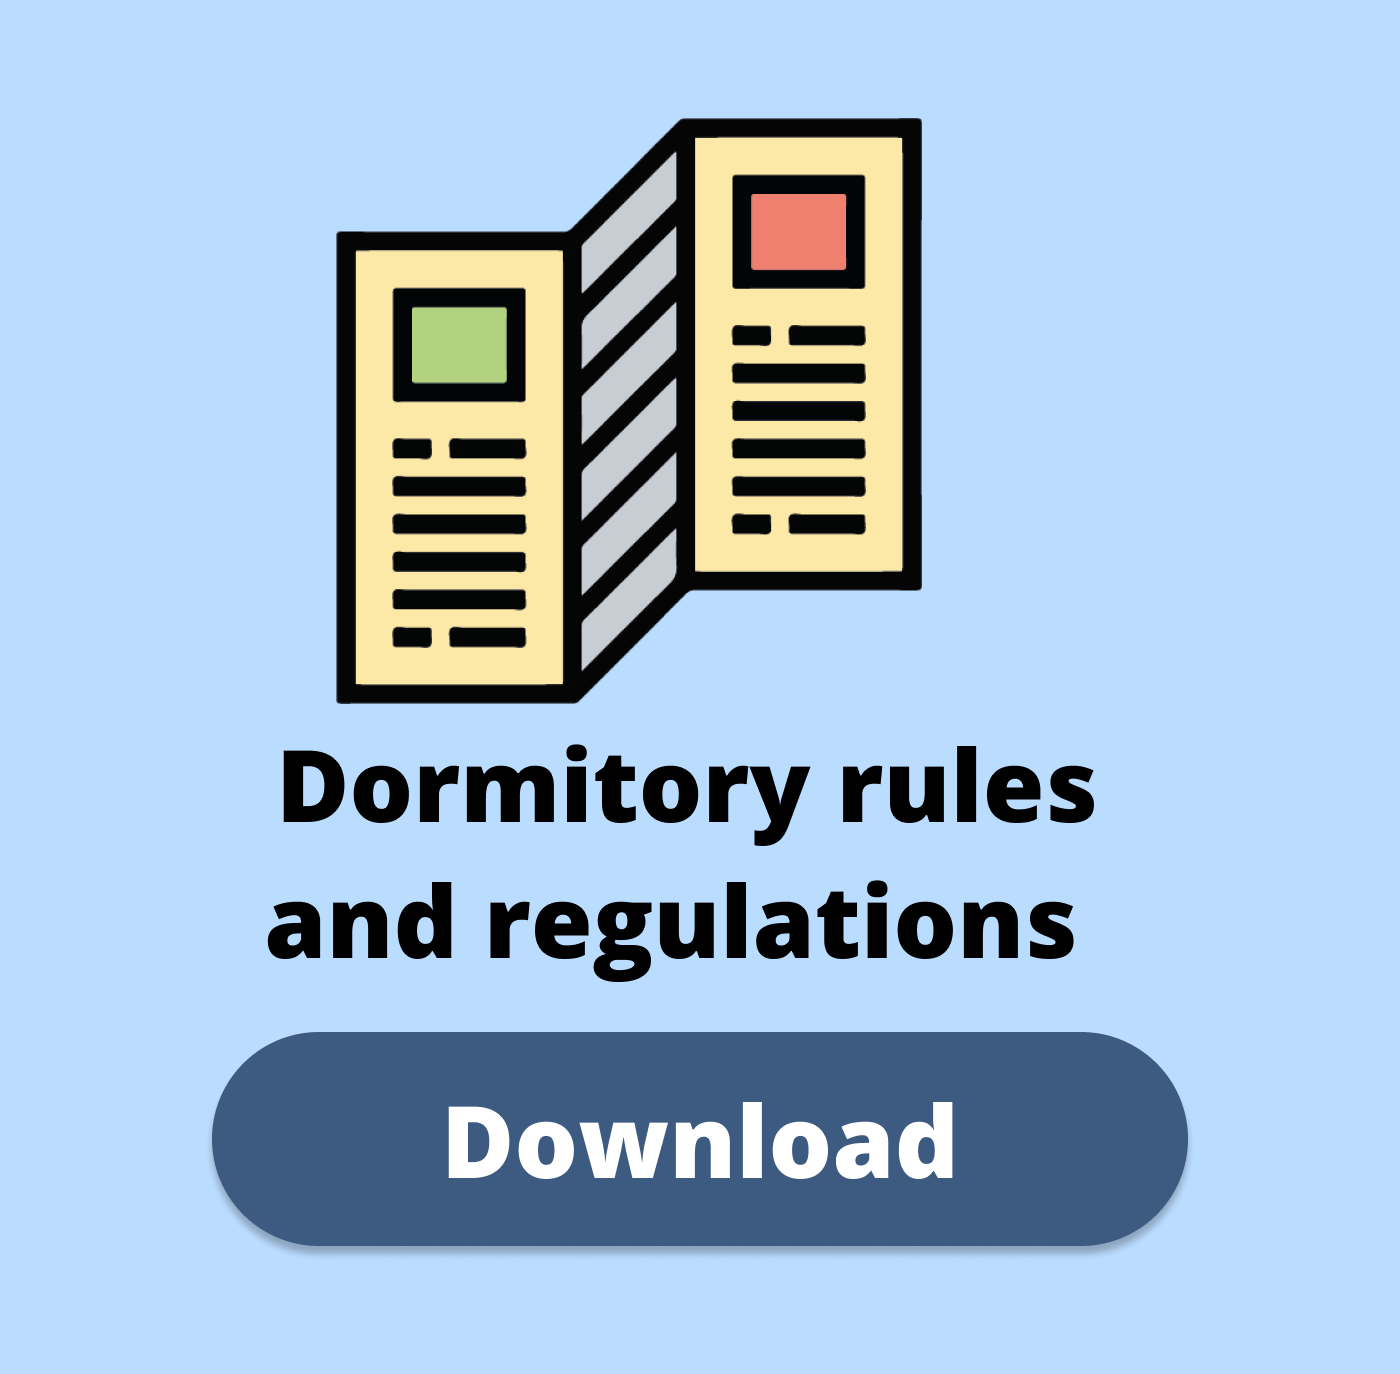 Dormitory rules and regulations